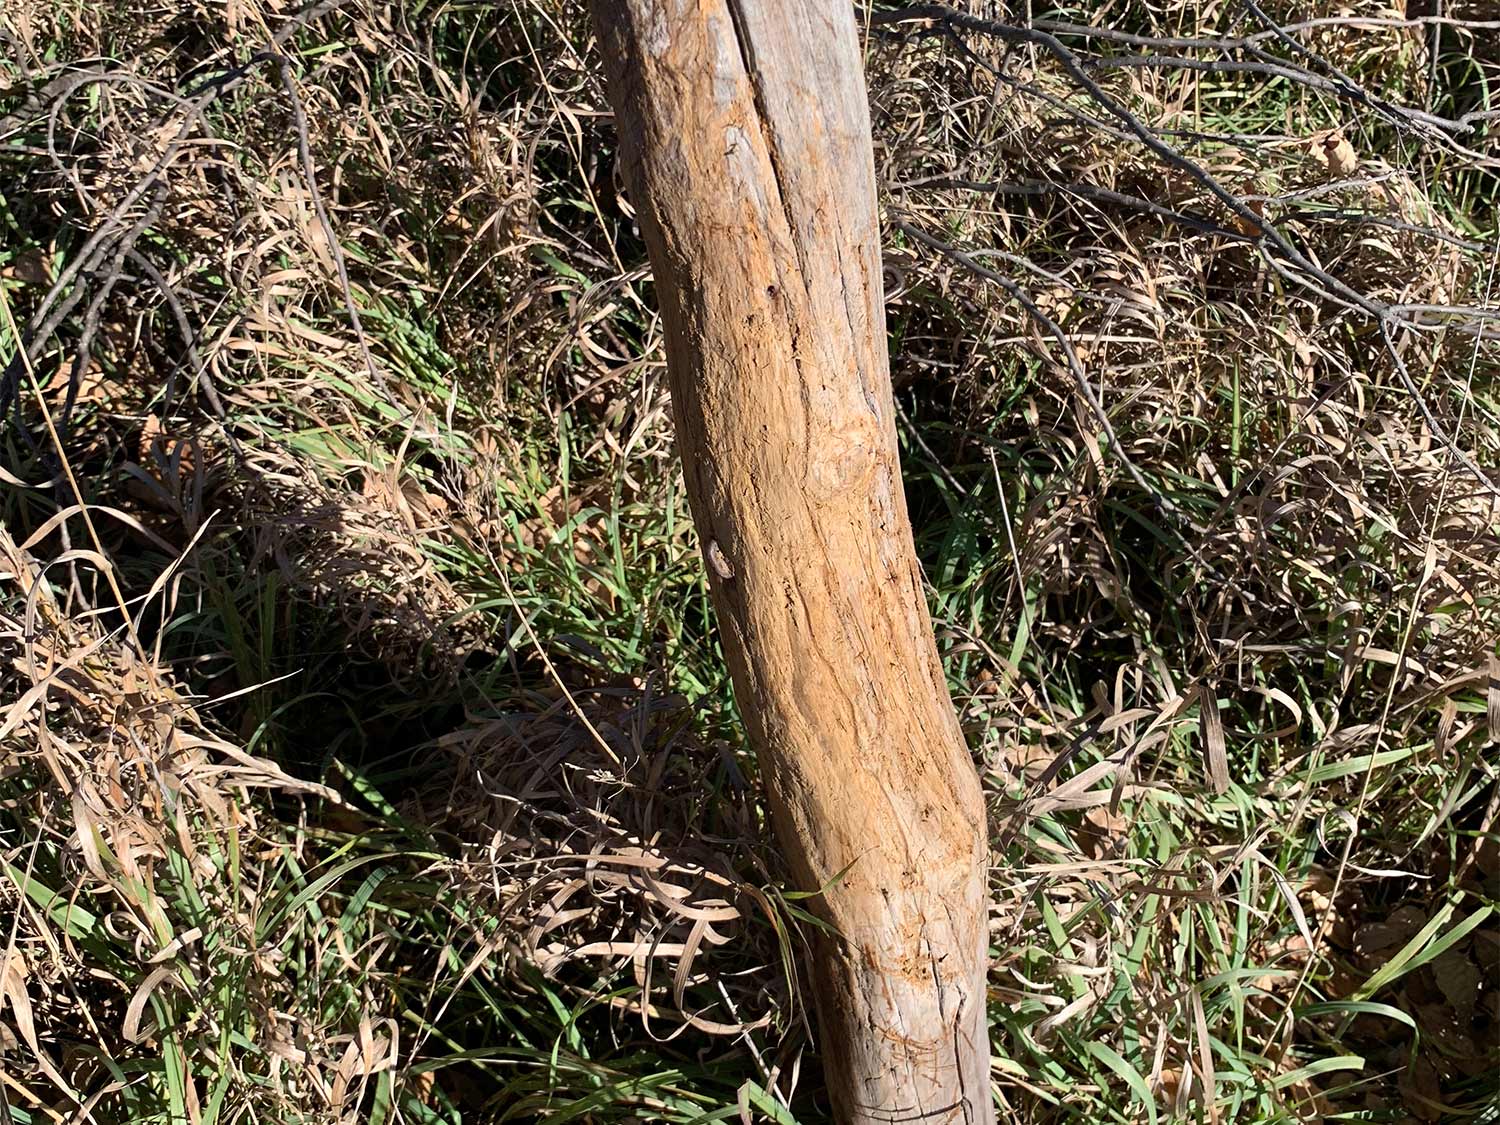 a wooden post scraped by a deer